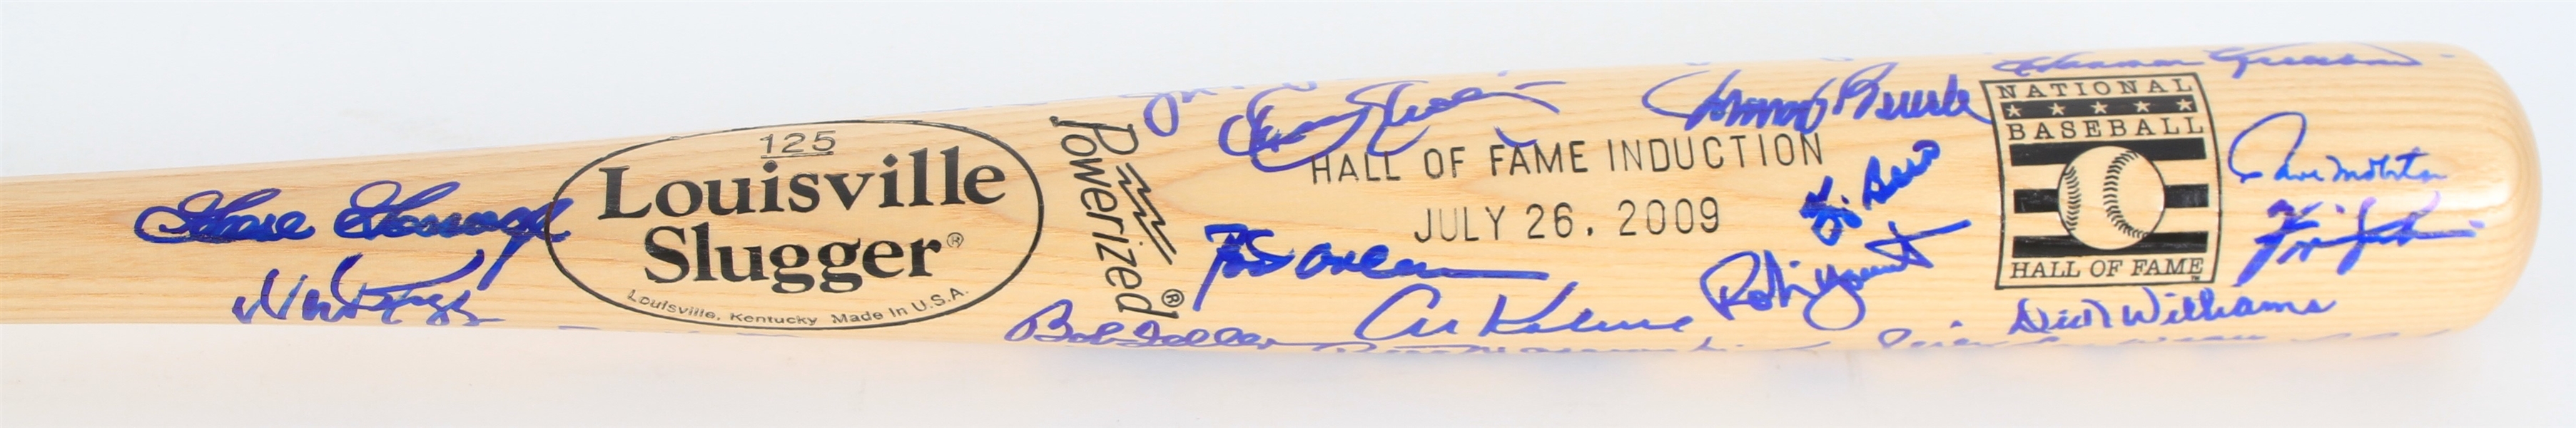 2009 Robin Yount Personal Collection Multi Signed Louisville Slugger Hall of Fame Induction Bat w/ 40+ Signatures Including Tom Seaver, Yogi Berra, Sandy Koufax & More (JSA/Yount Lettter)